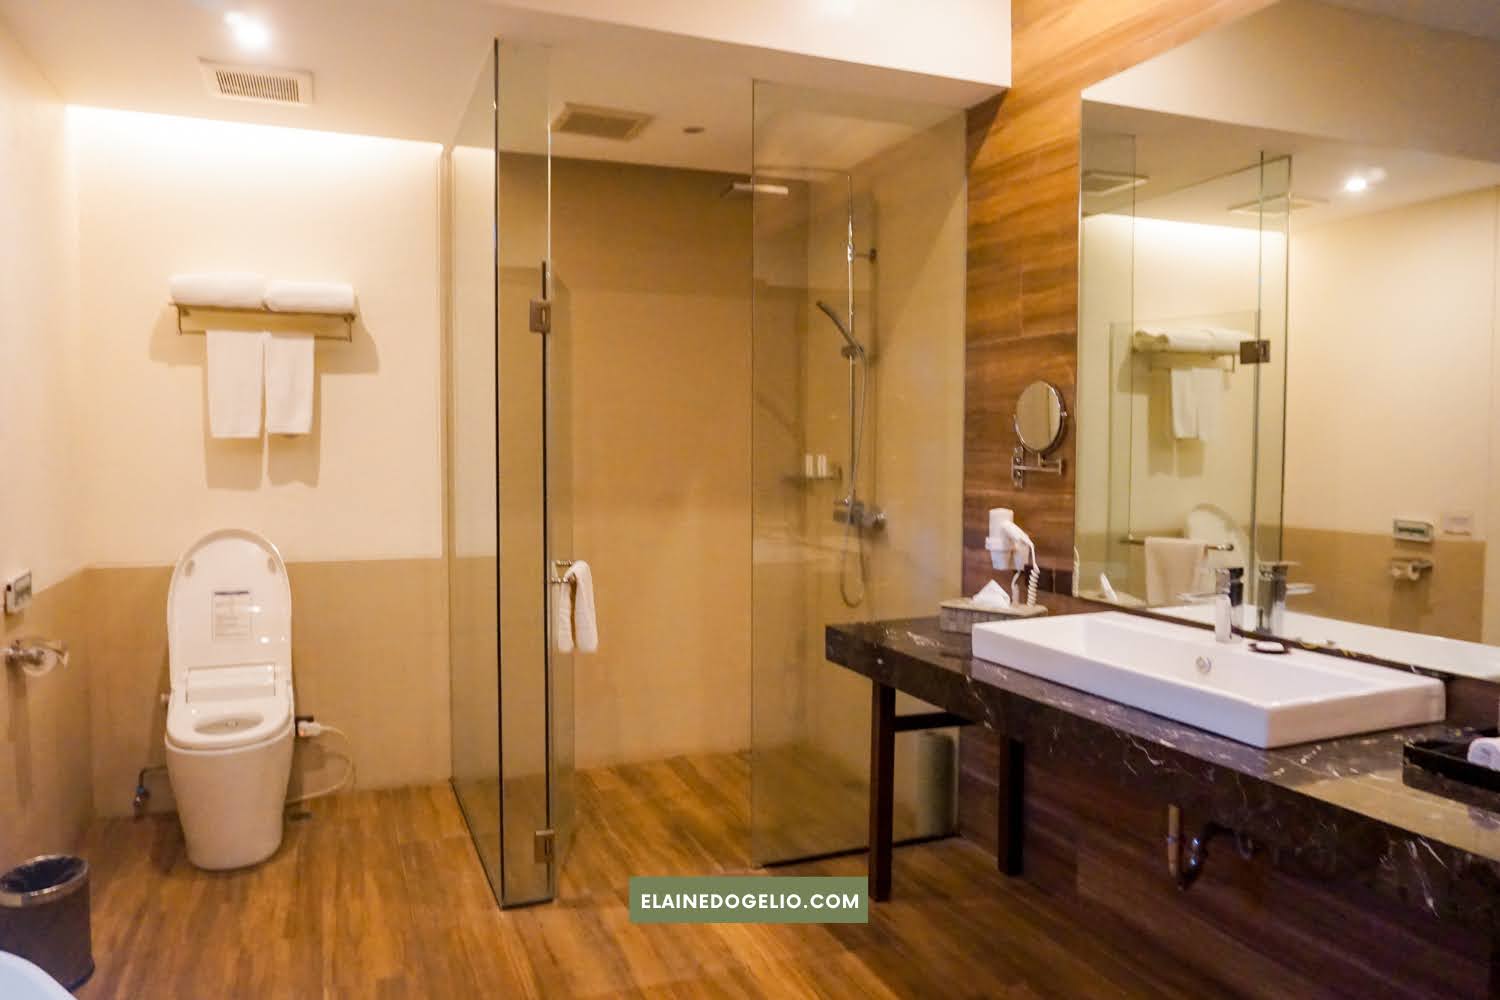 Where to Stay in Alfonso, Cavite Abagatan ti Manila Staycation Hotel